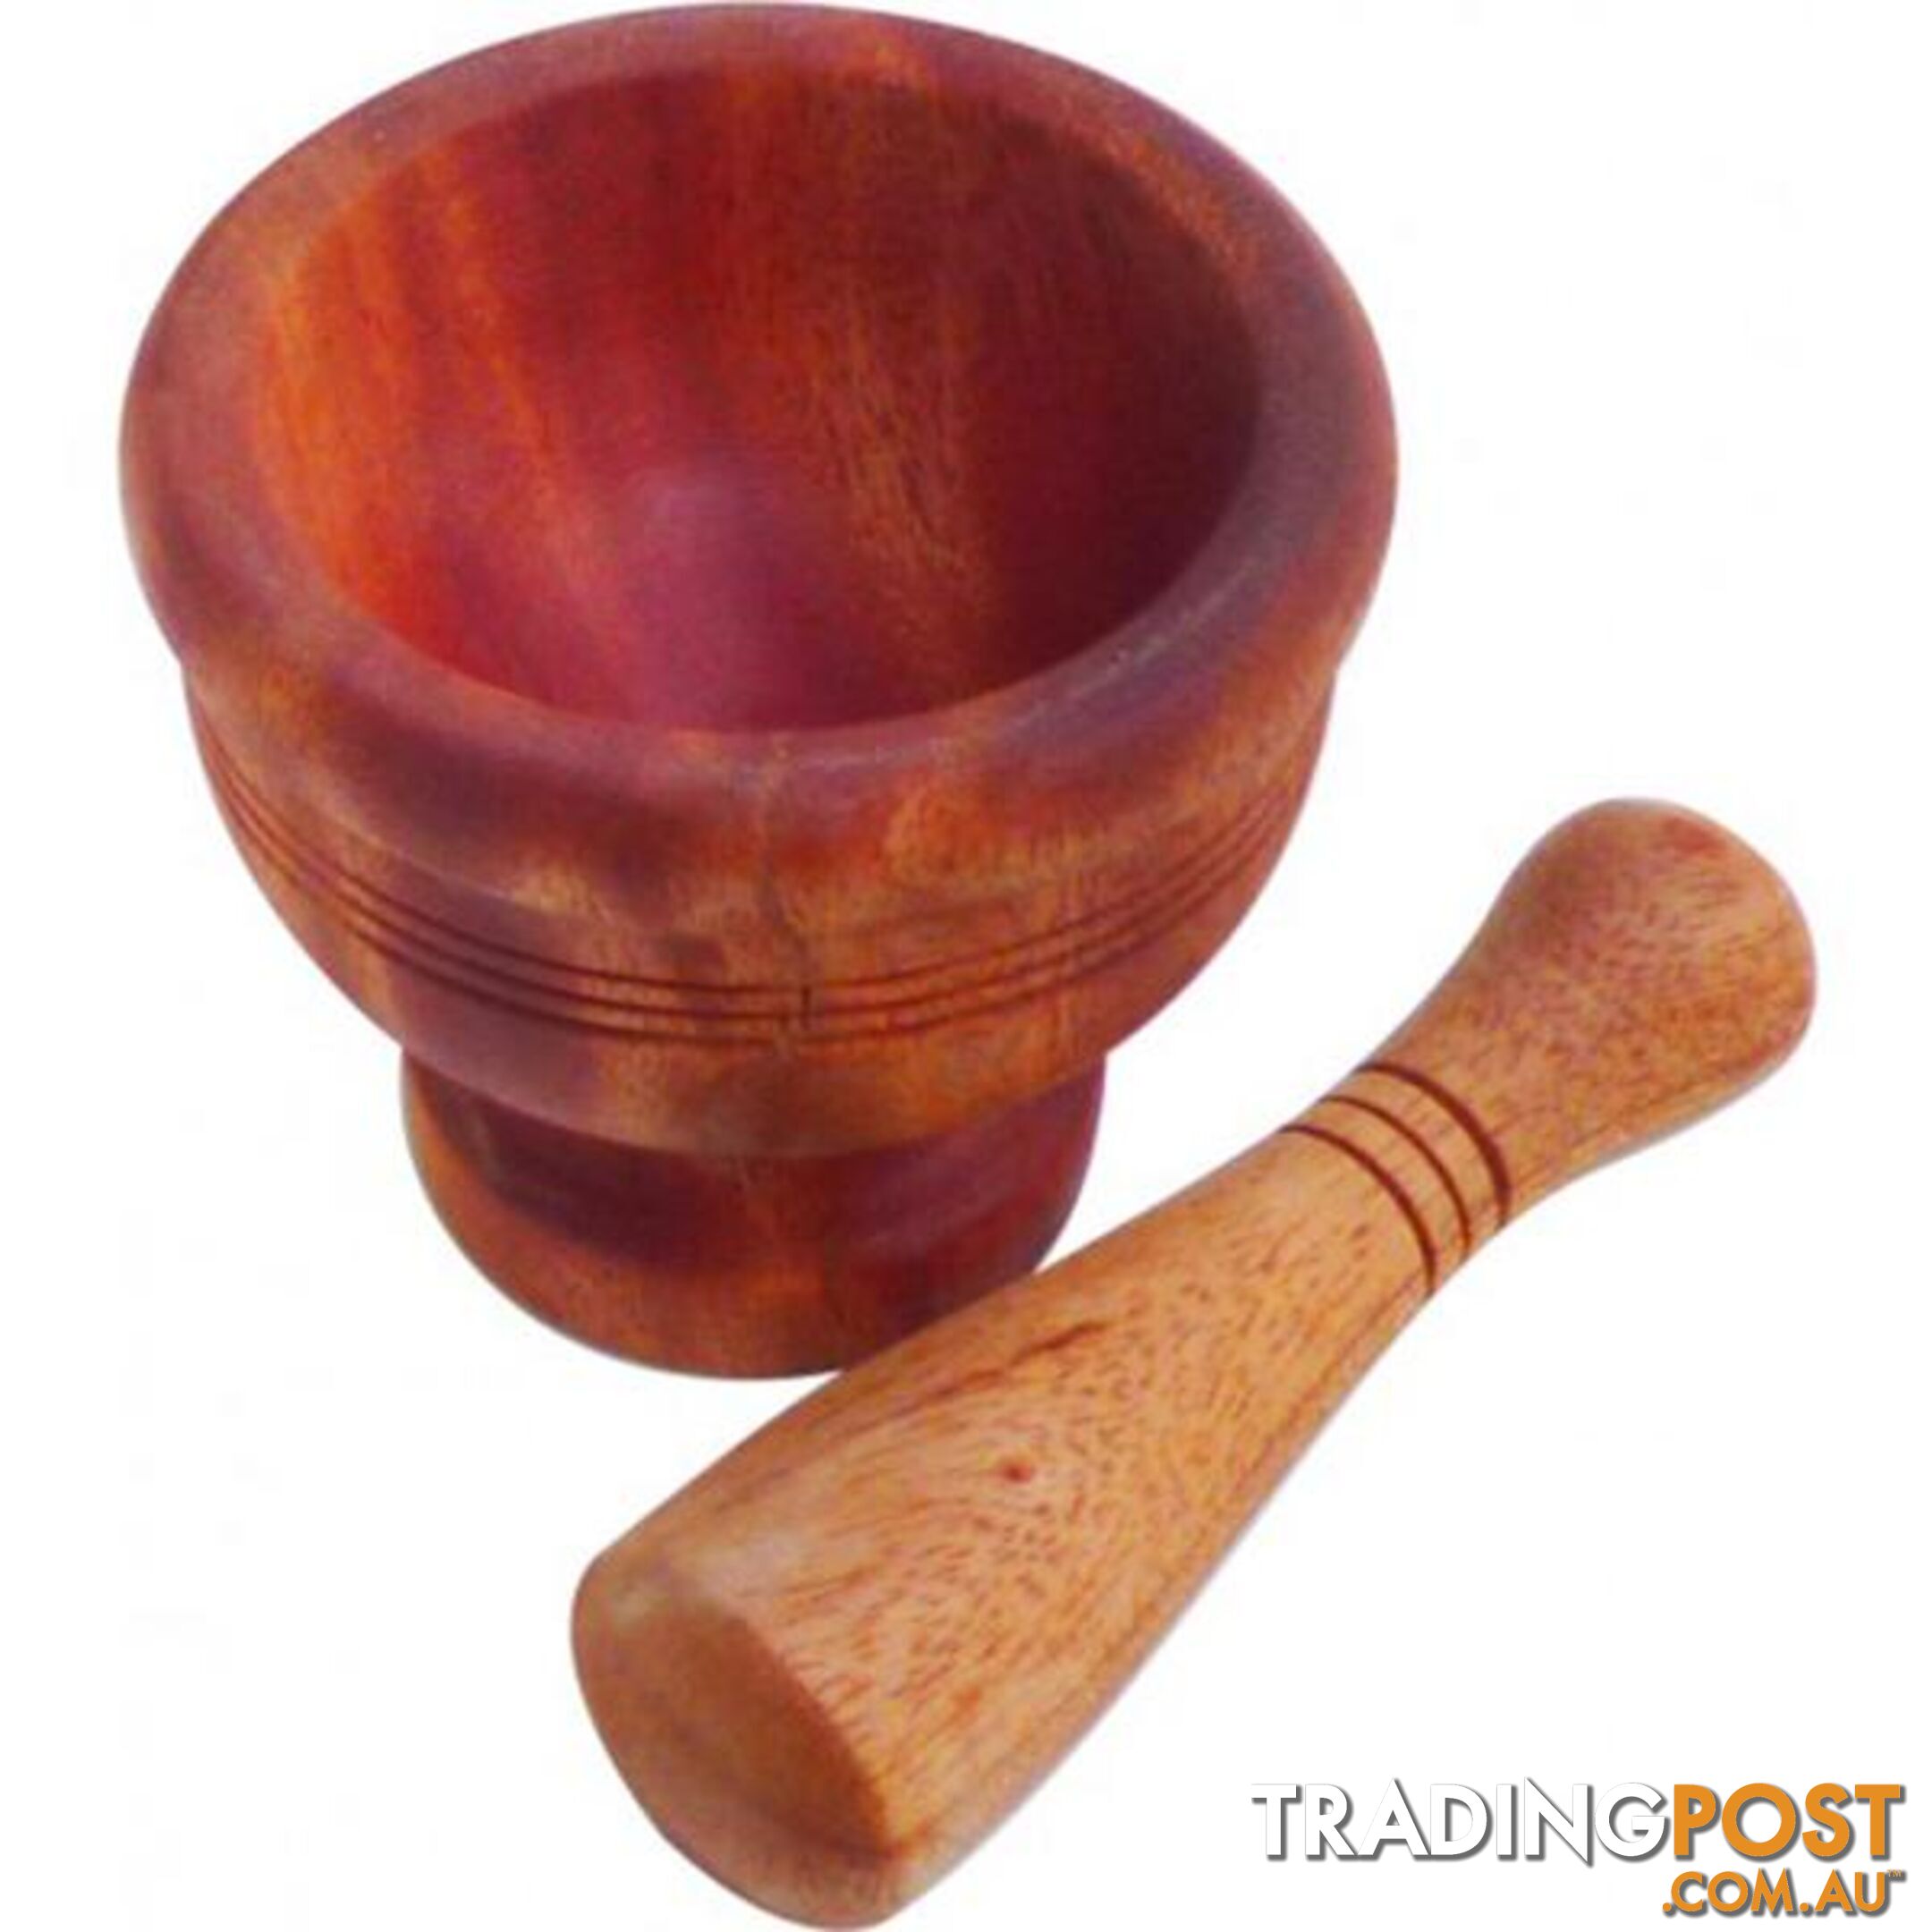 Wooden Pestle and Mortar - Qtoys - 8936074268041